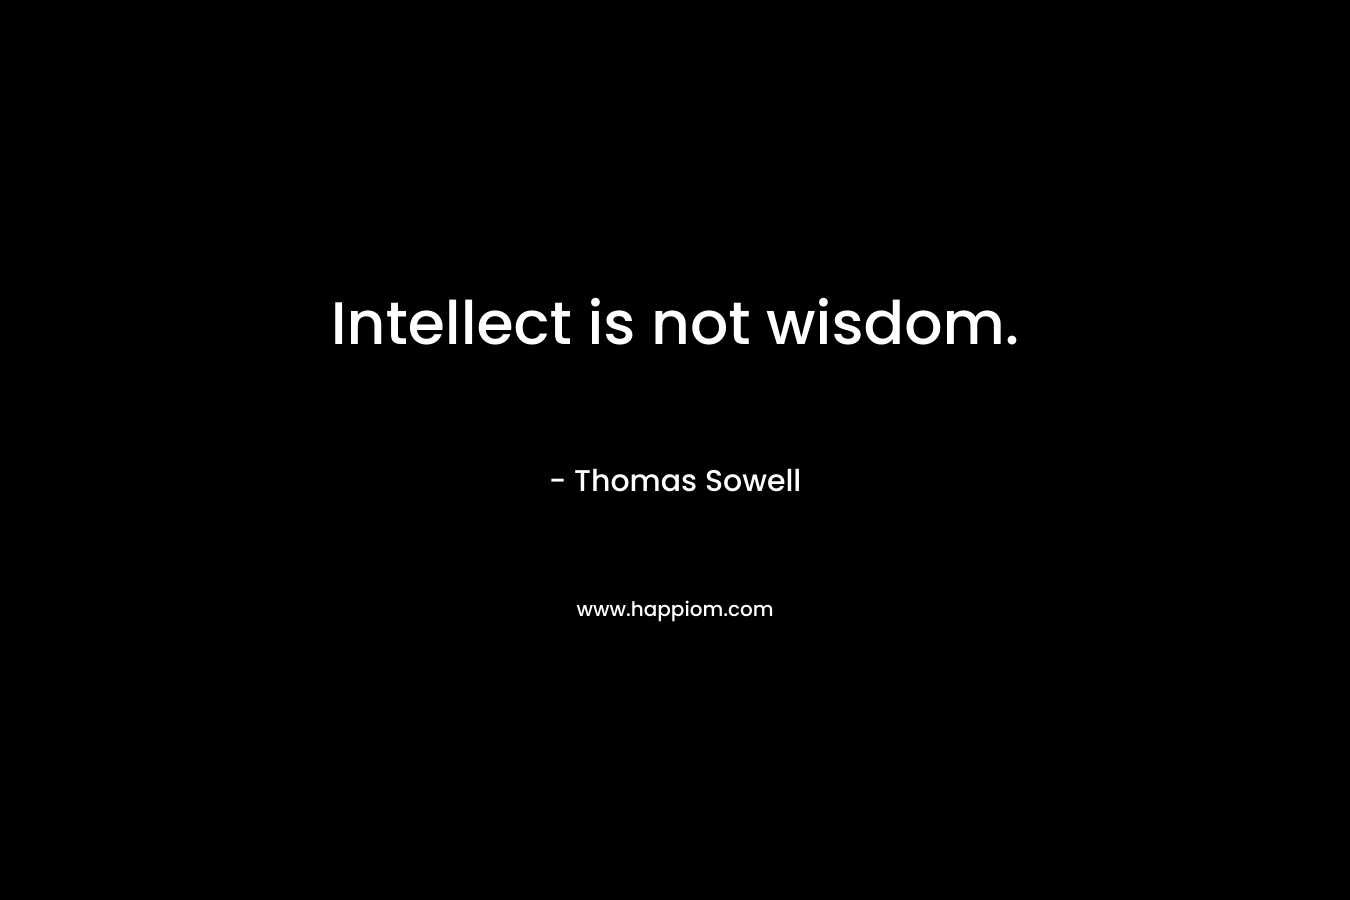 Intellect is not wisdom. – Thomas Sowell